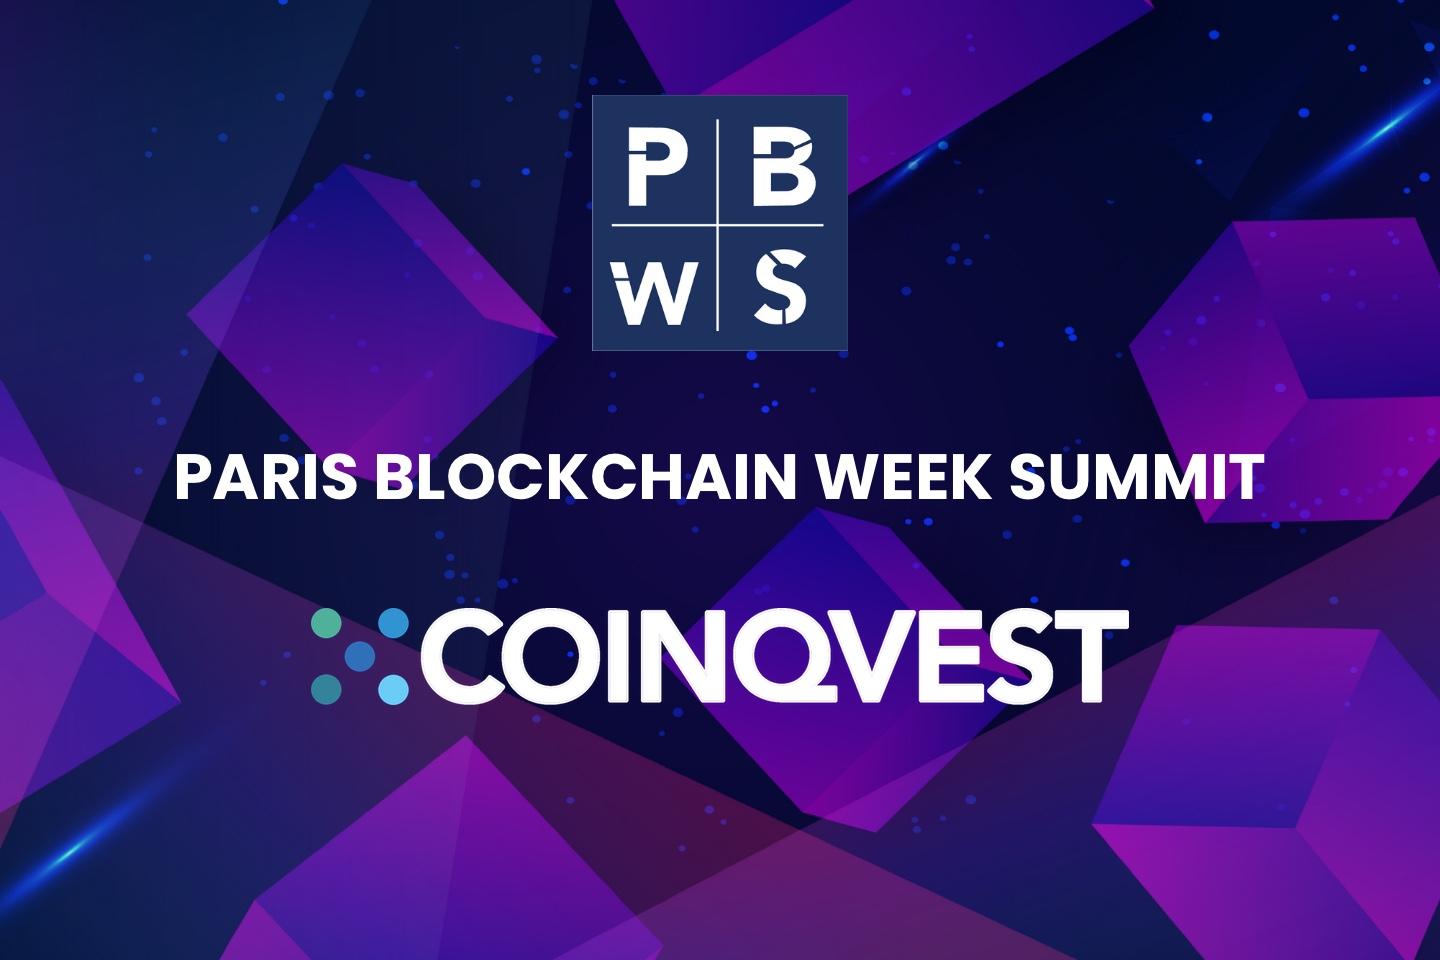 Meet the COINQVEST Team at the Paris Blockchain Week Summit from April 13th-14th